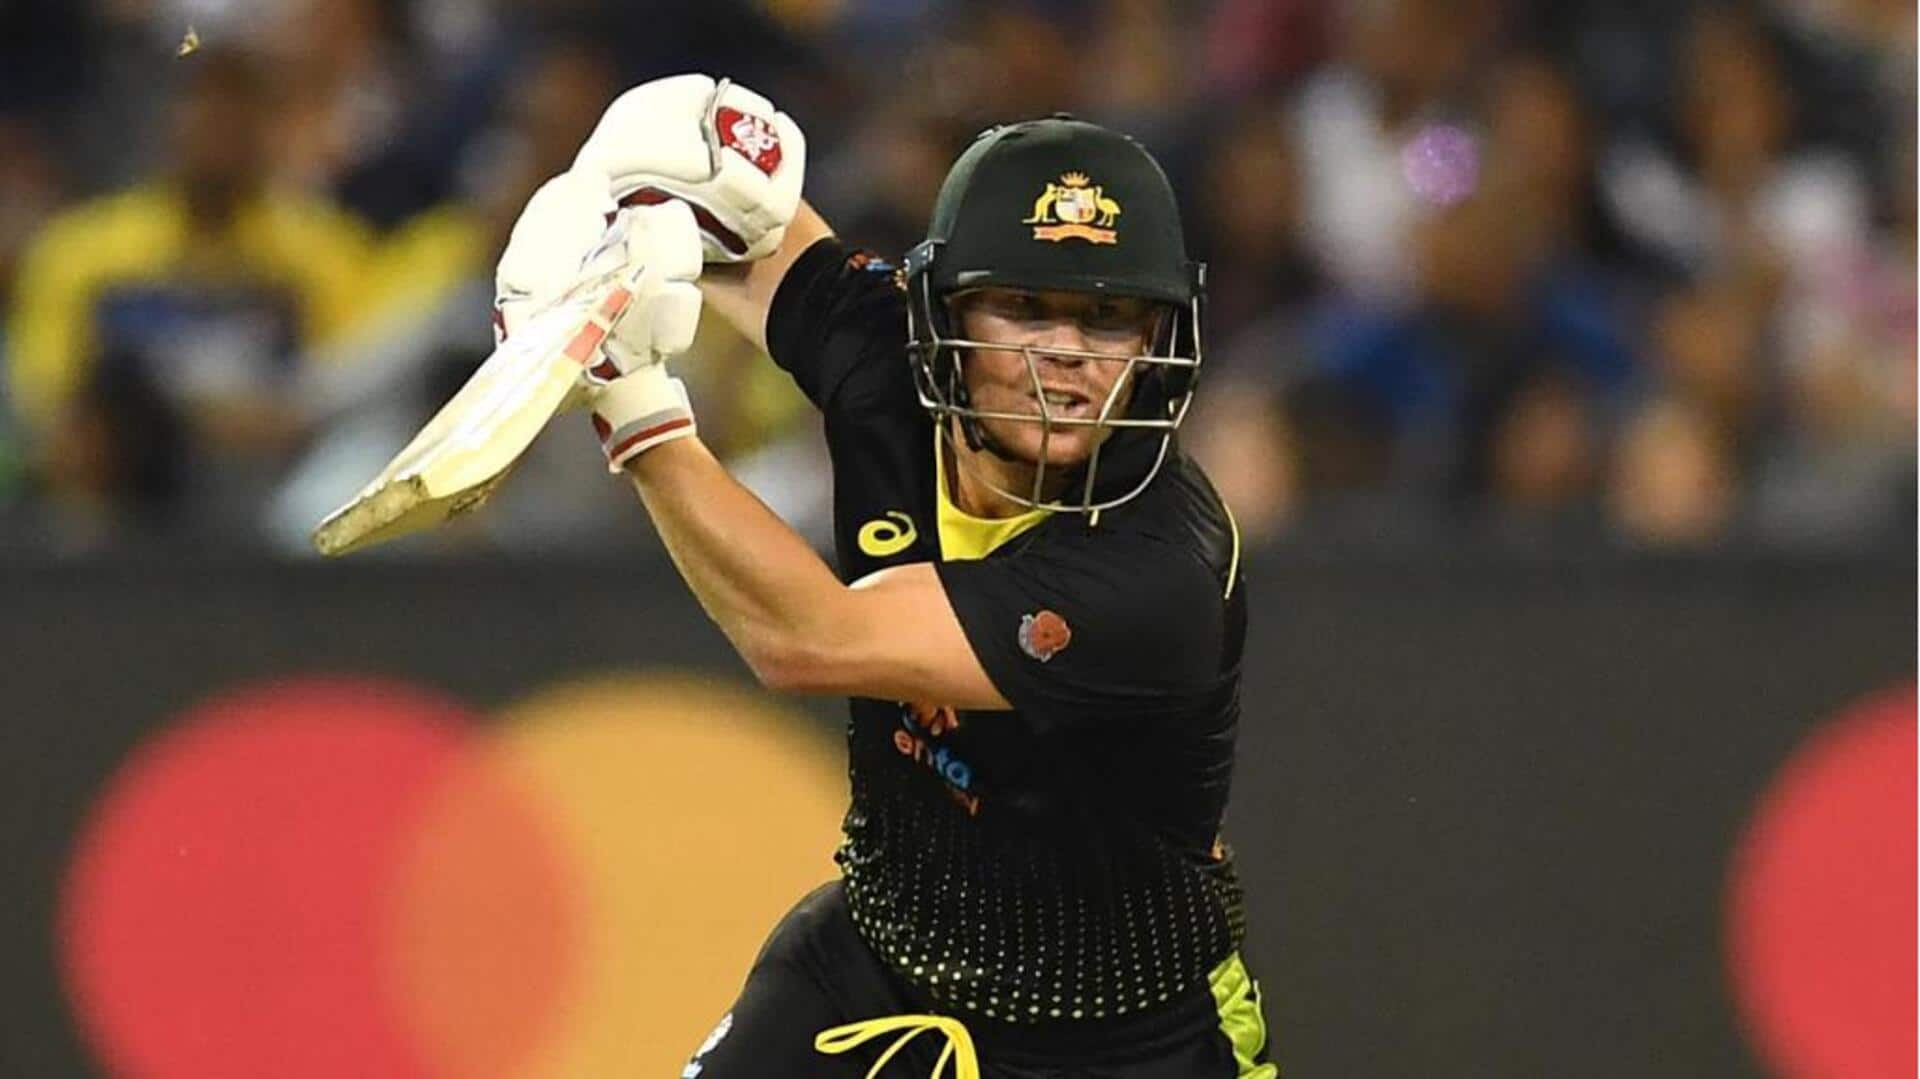 David Warner averages 39.08 in home T20Is: Decoding his stats